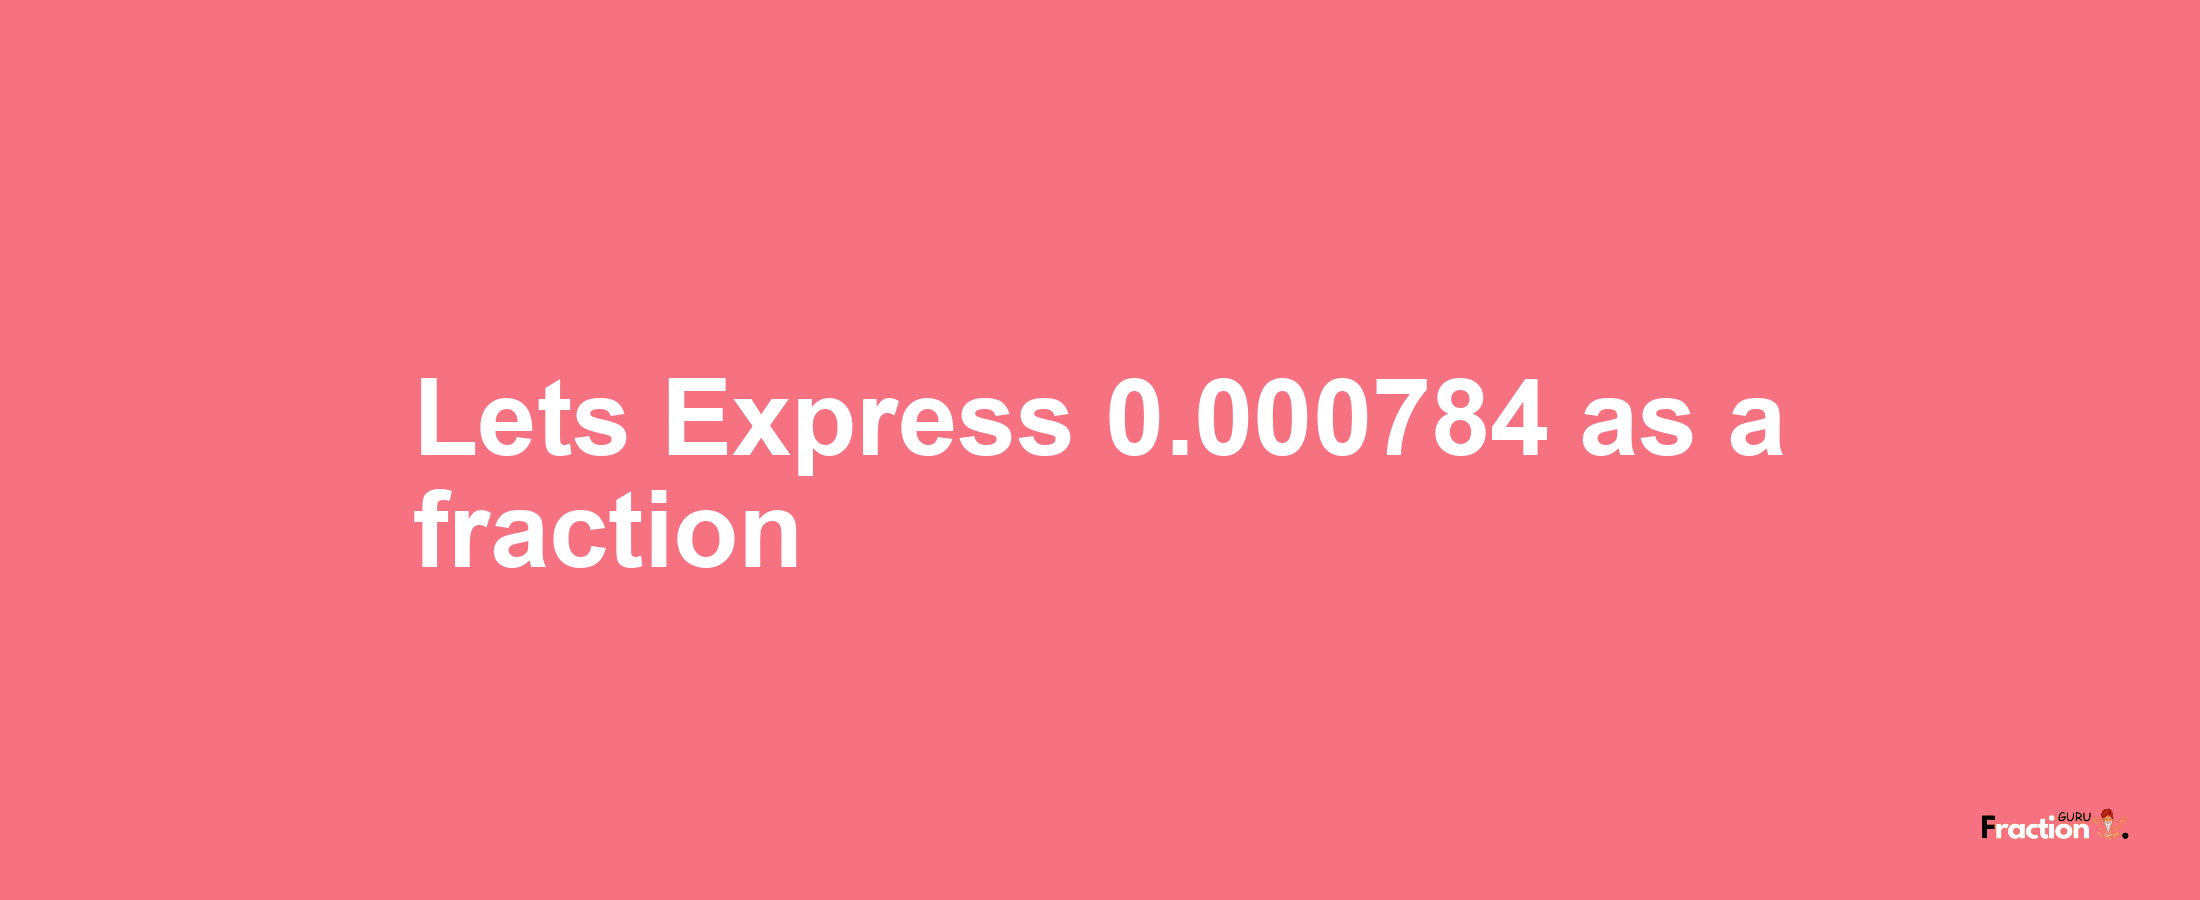 Lets Express 0.000784 as afraction